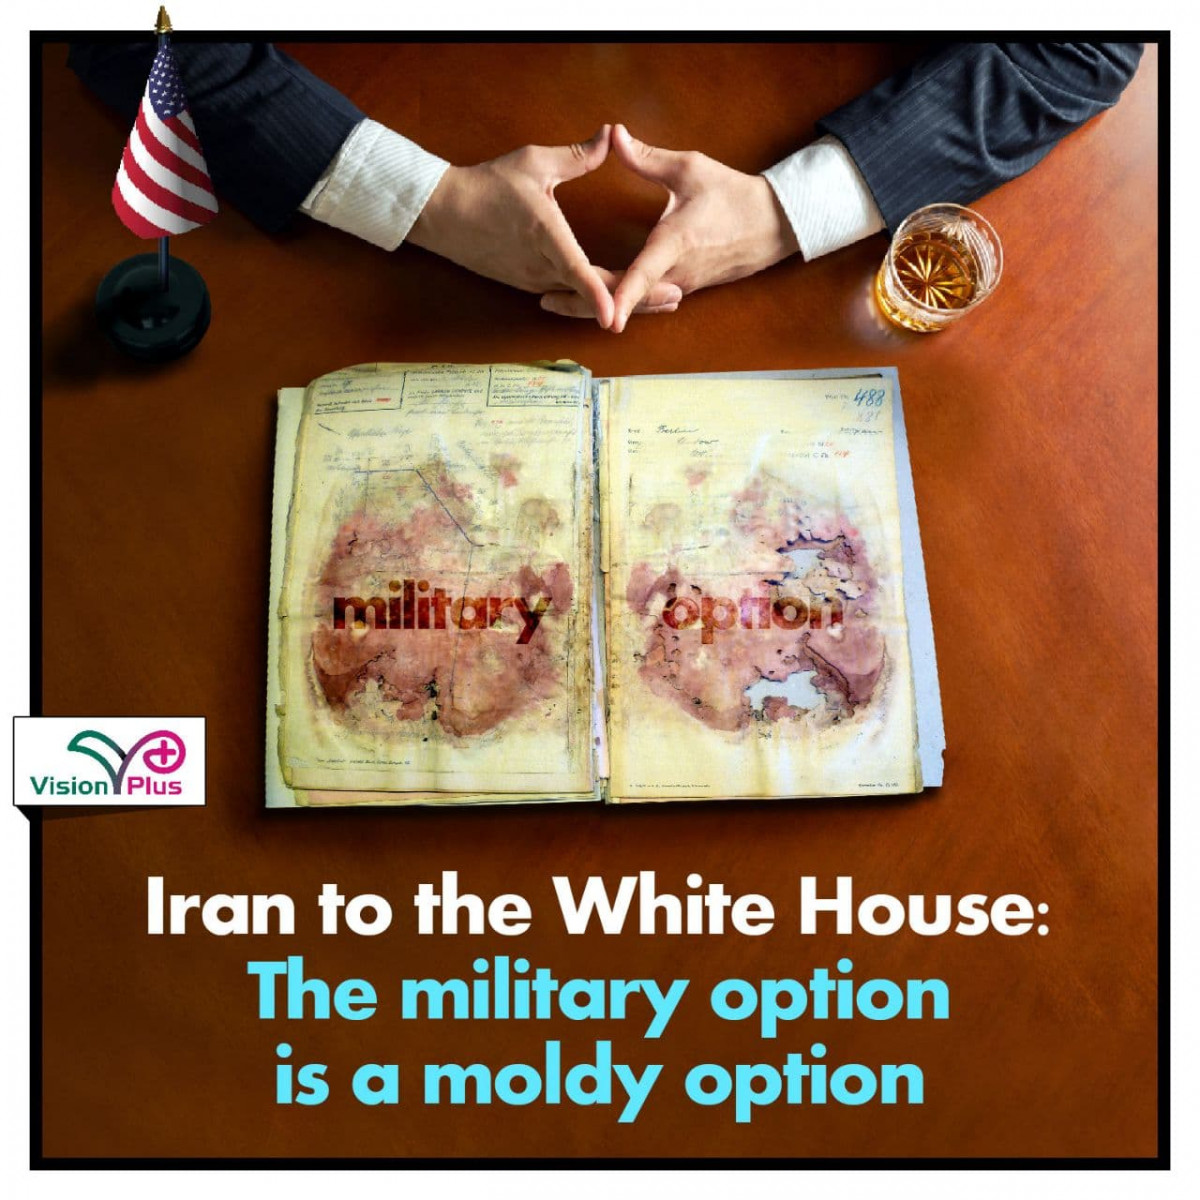 Iran to the White House: The military option is a moldy option